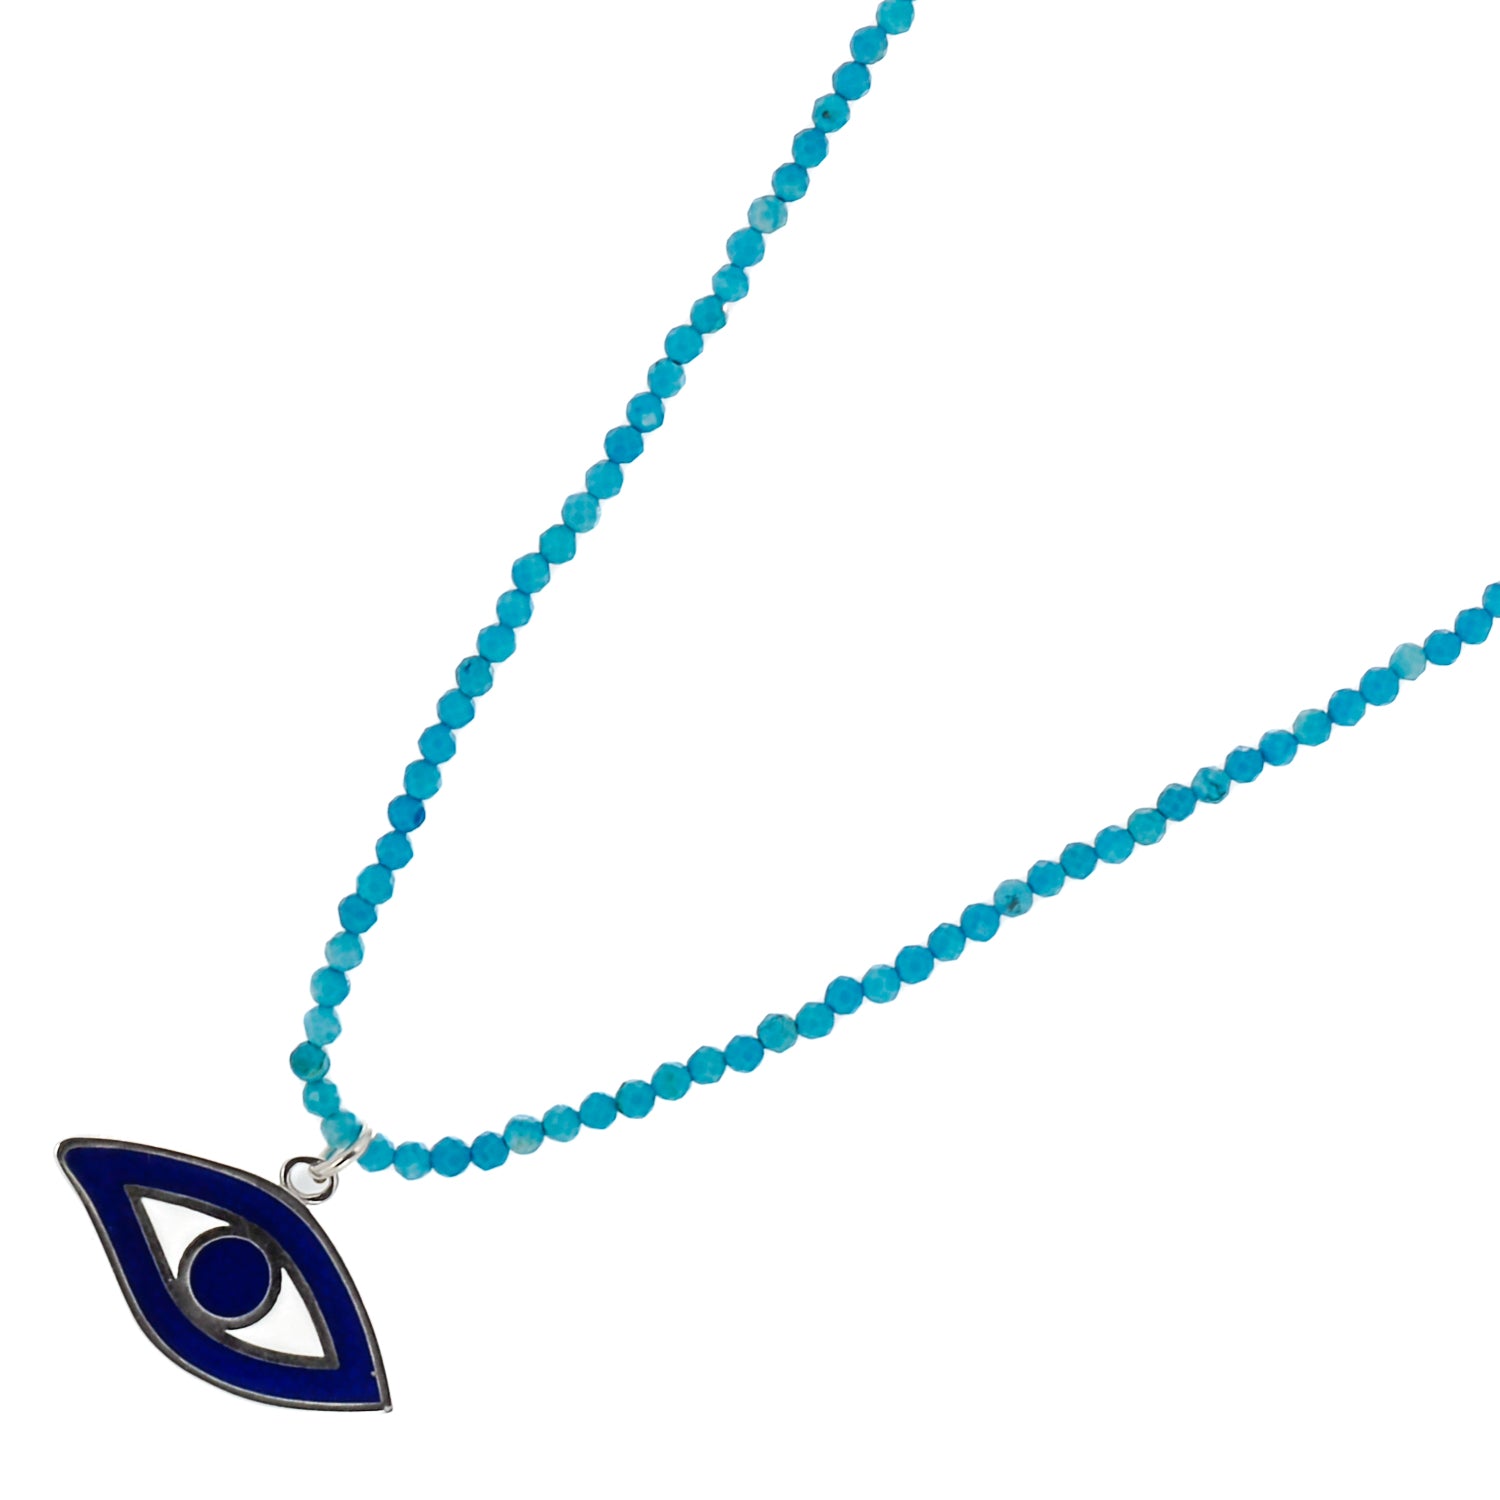 Turquoise Evil Eye Protection Necklace crafted with natural turquoise stone beads and a beautiful 925 Sterling Silver Evil Eye charm.